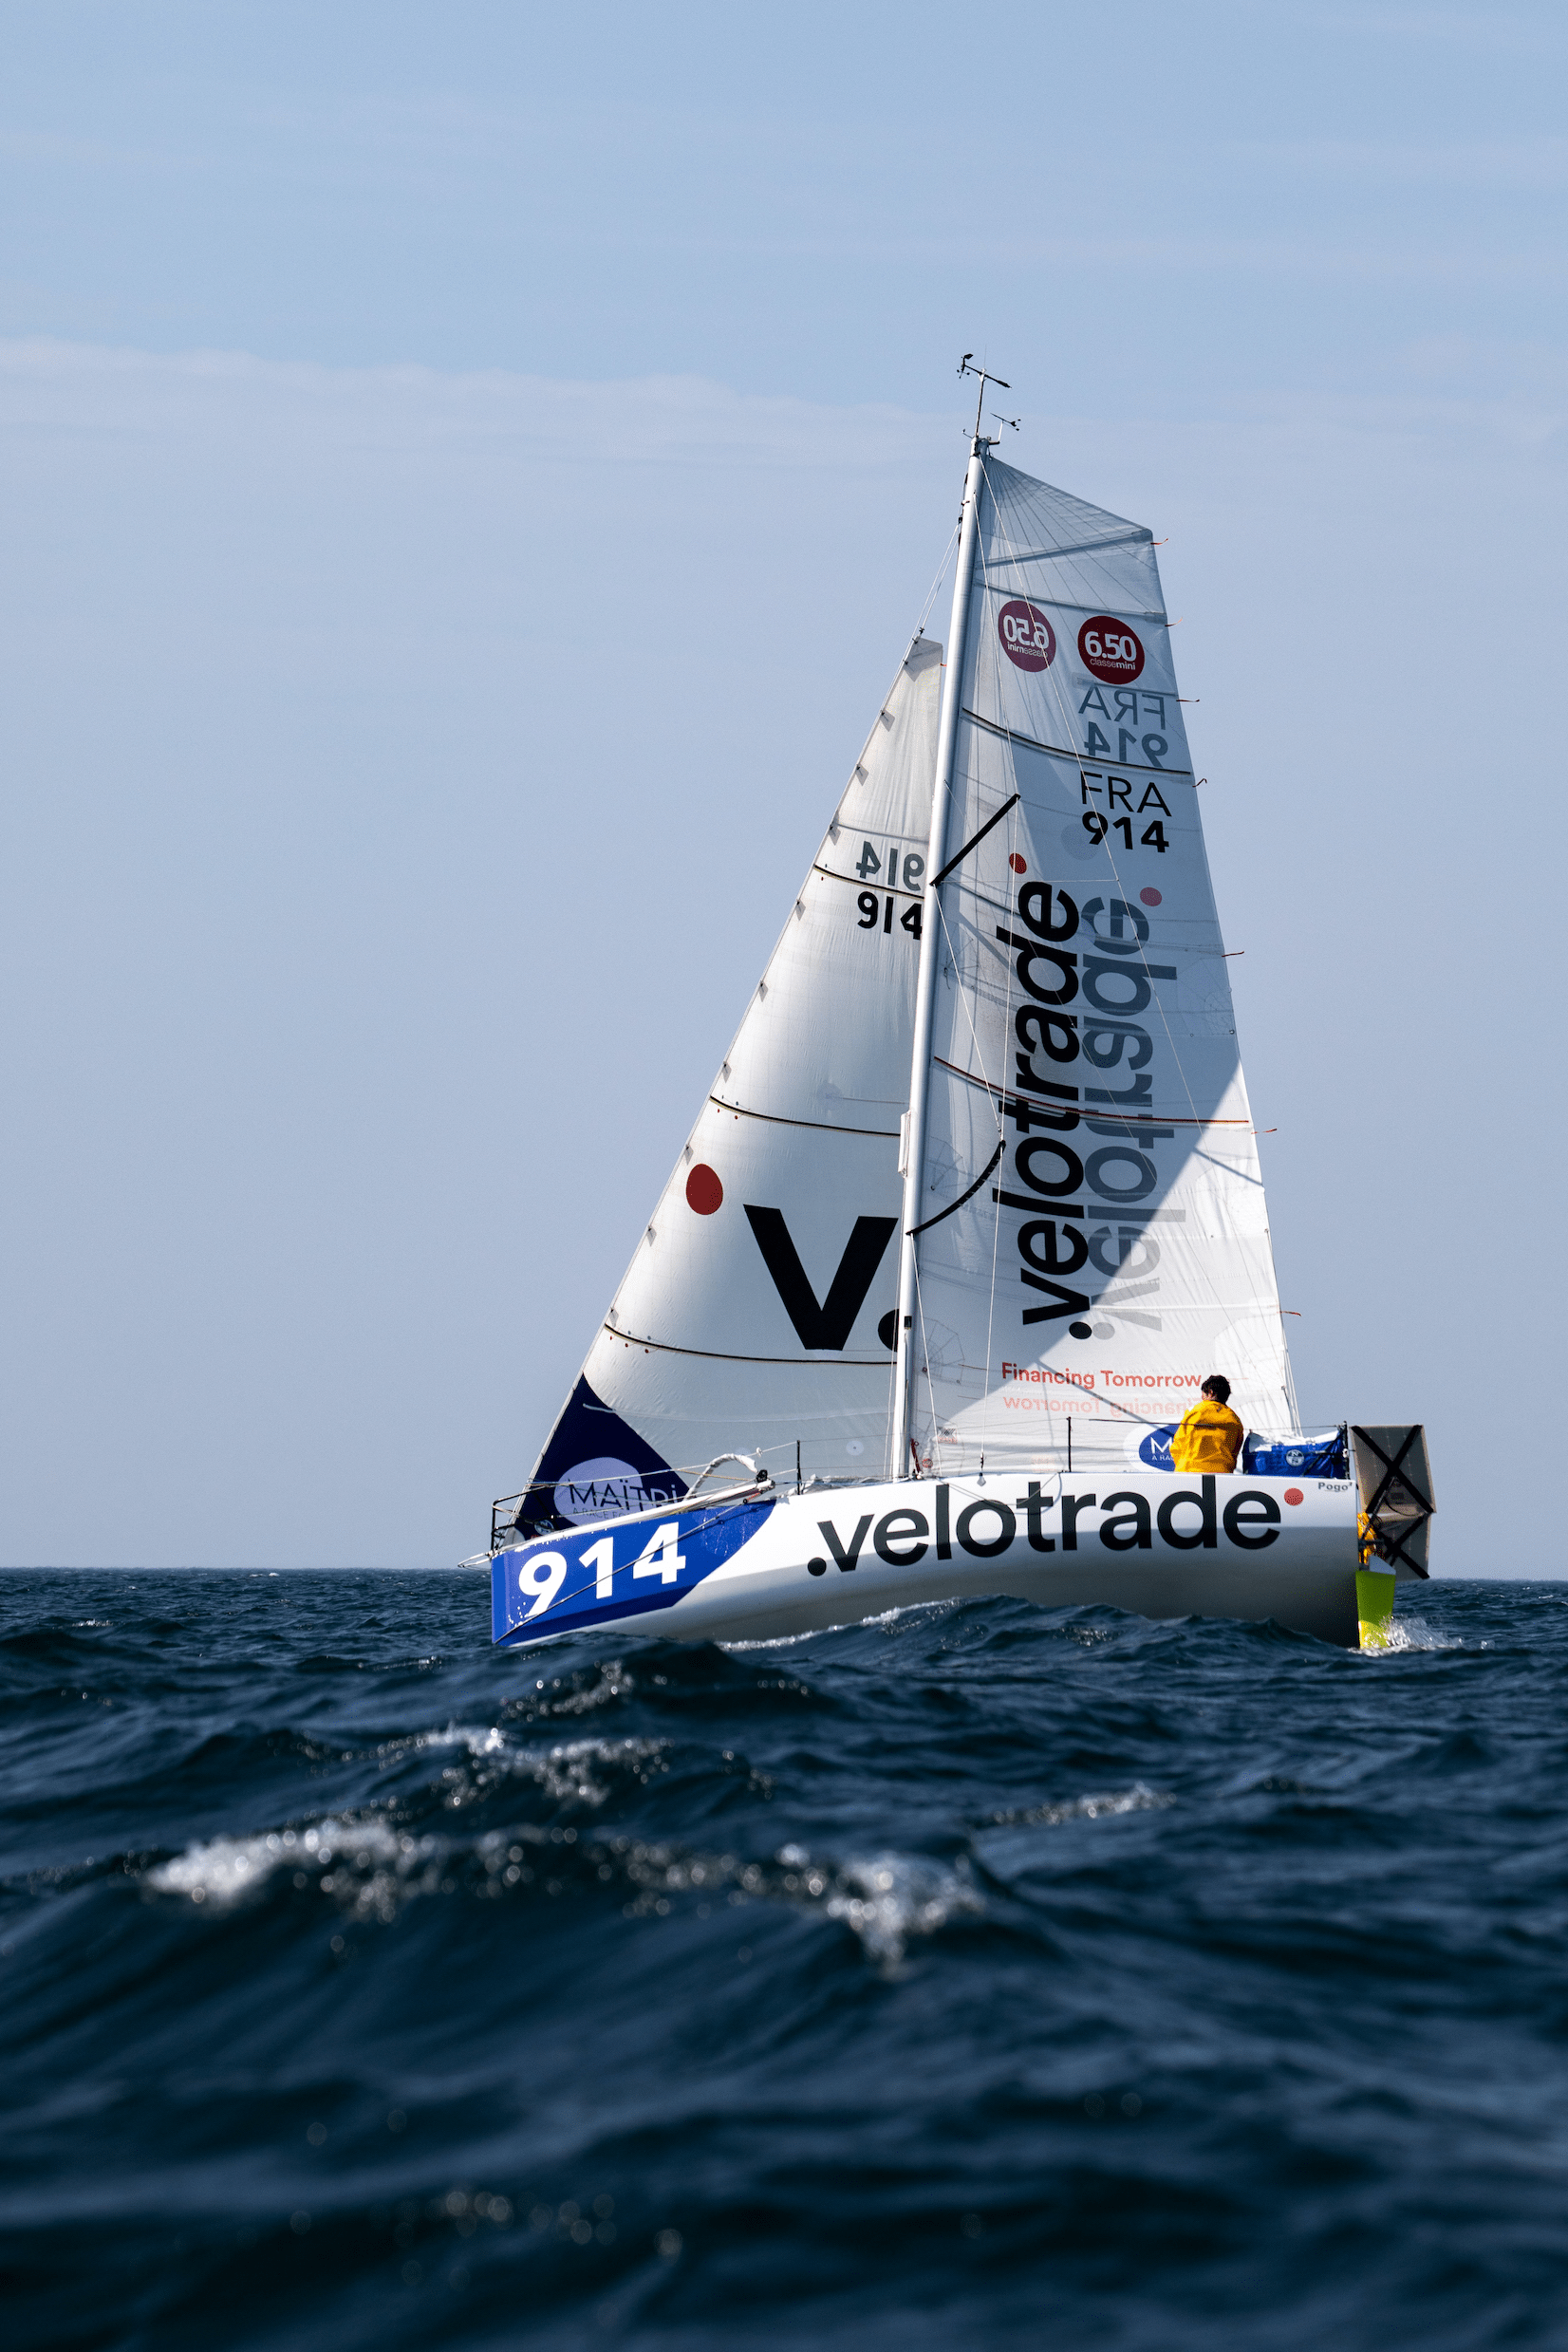 This is a full shot of the Velotrade sailboat at the 2021 Mini Gascogna race.